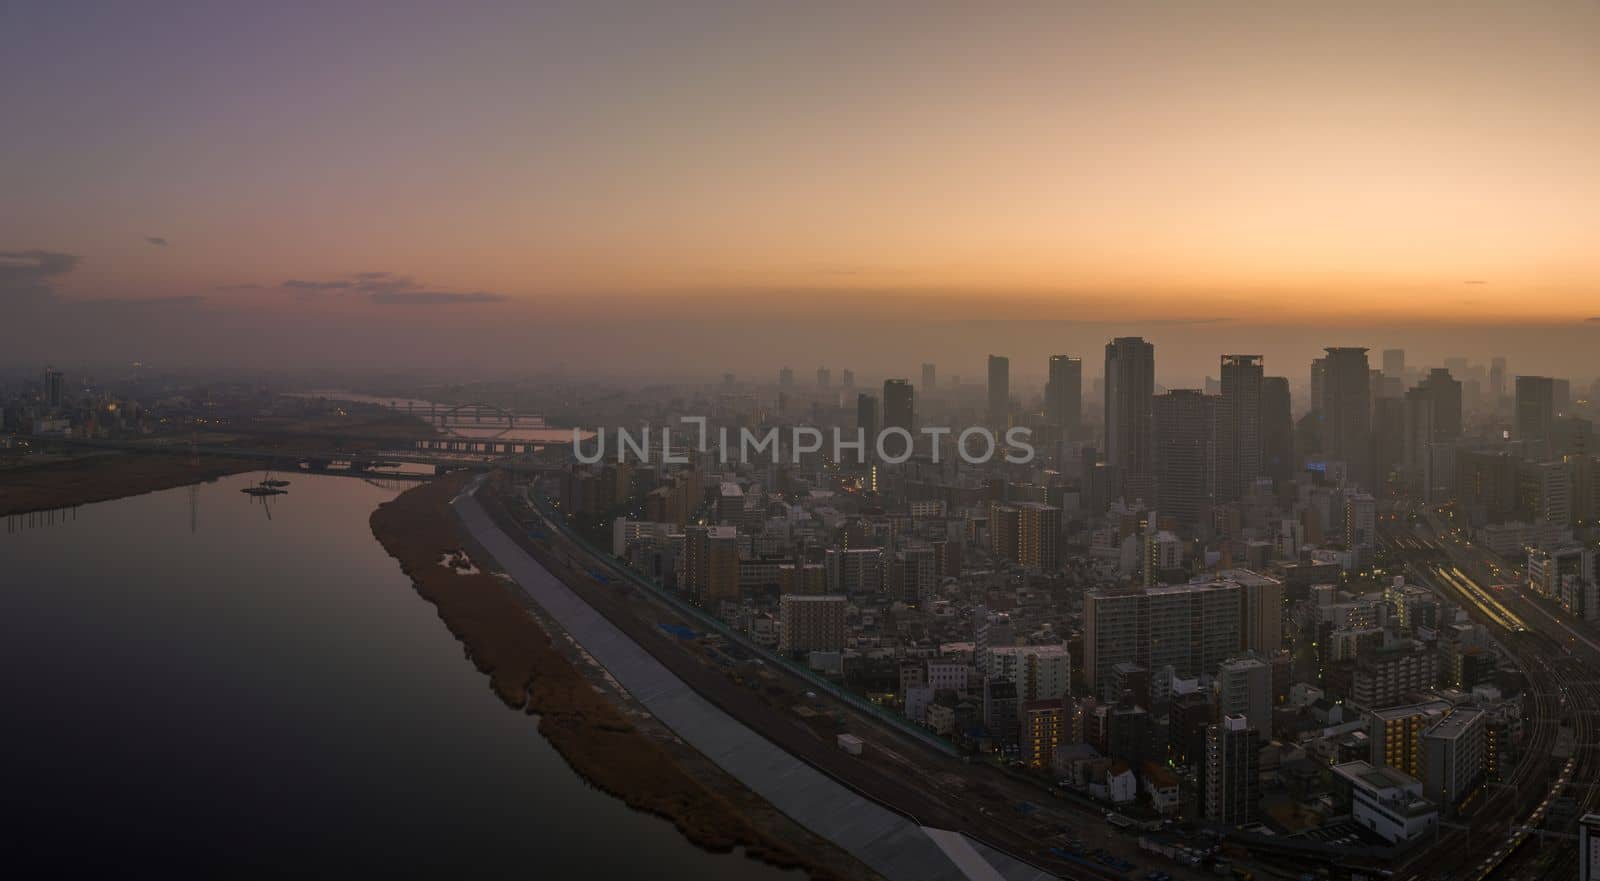 Hazy sunrise over high rise buildings in sprawling city next to river. High quality photo